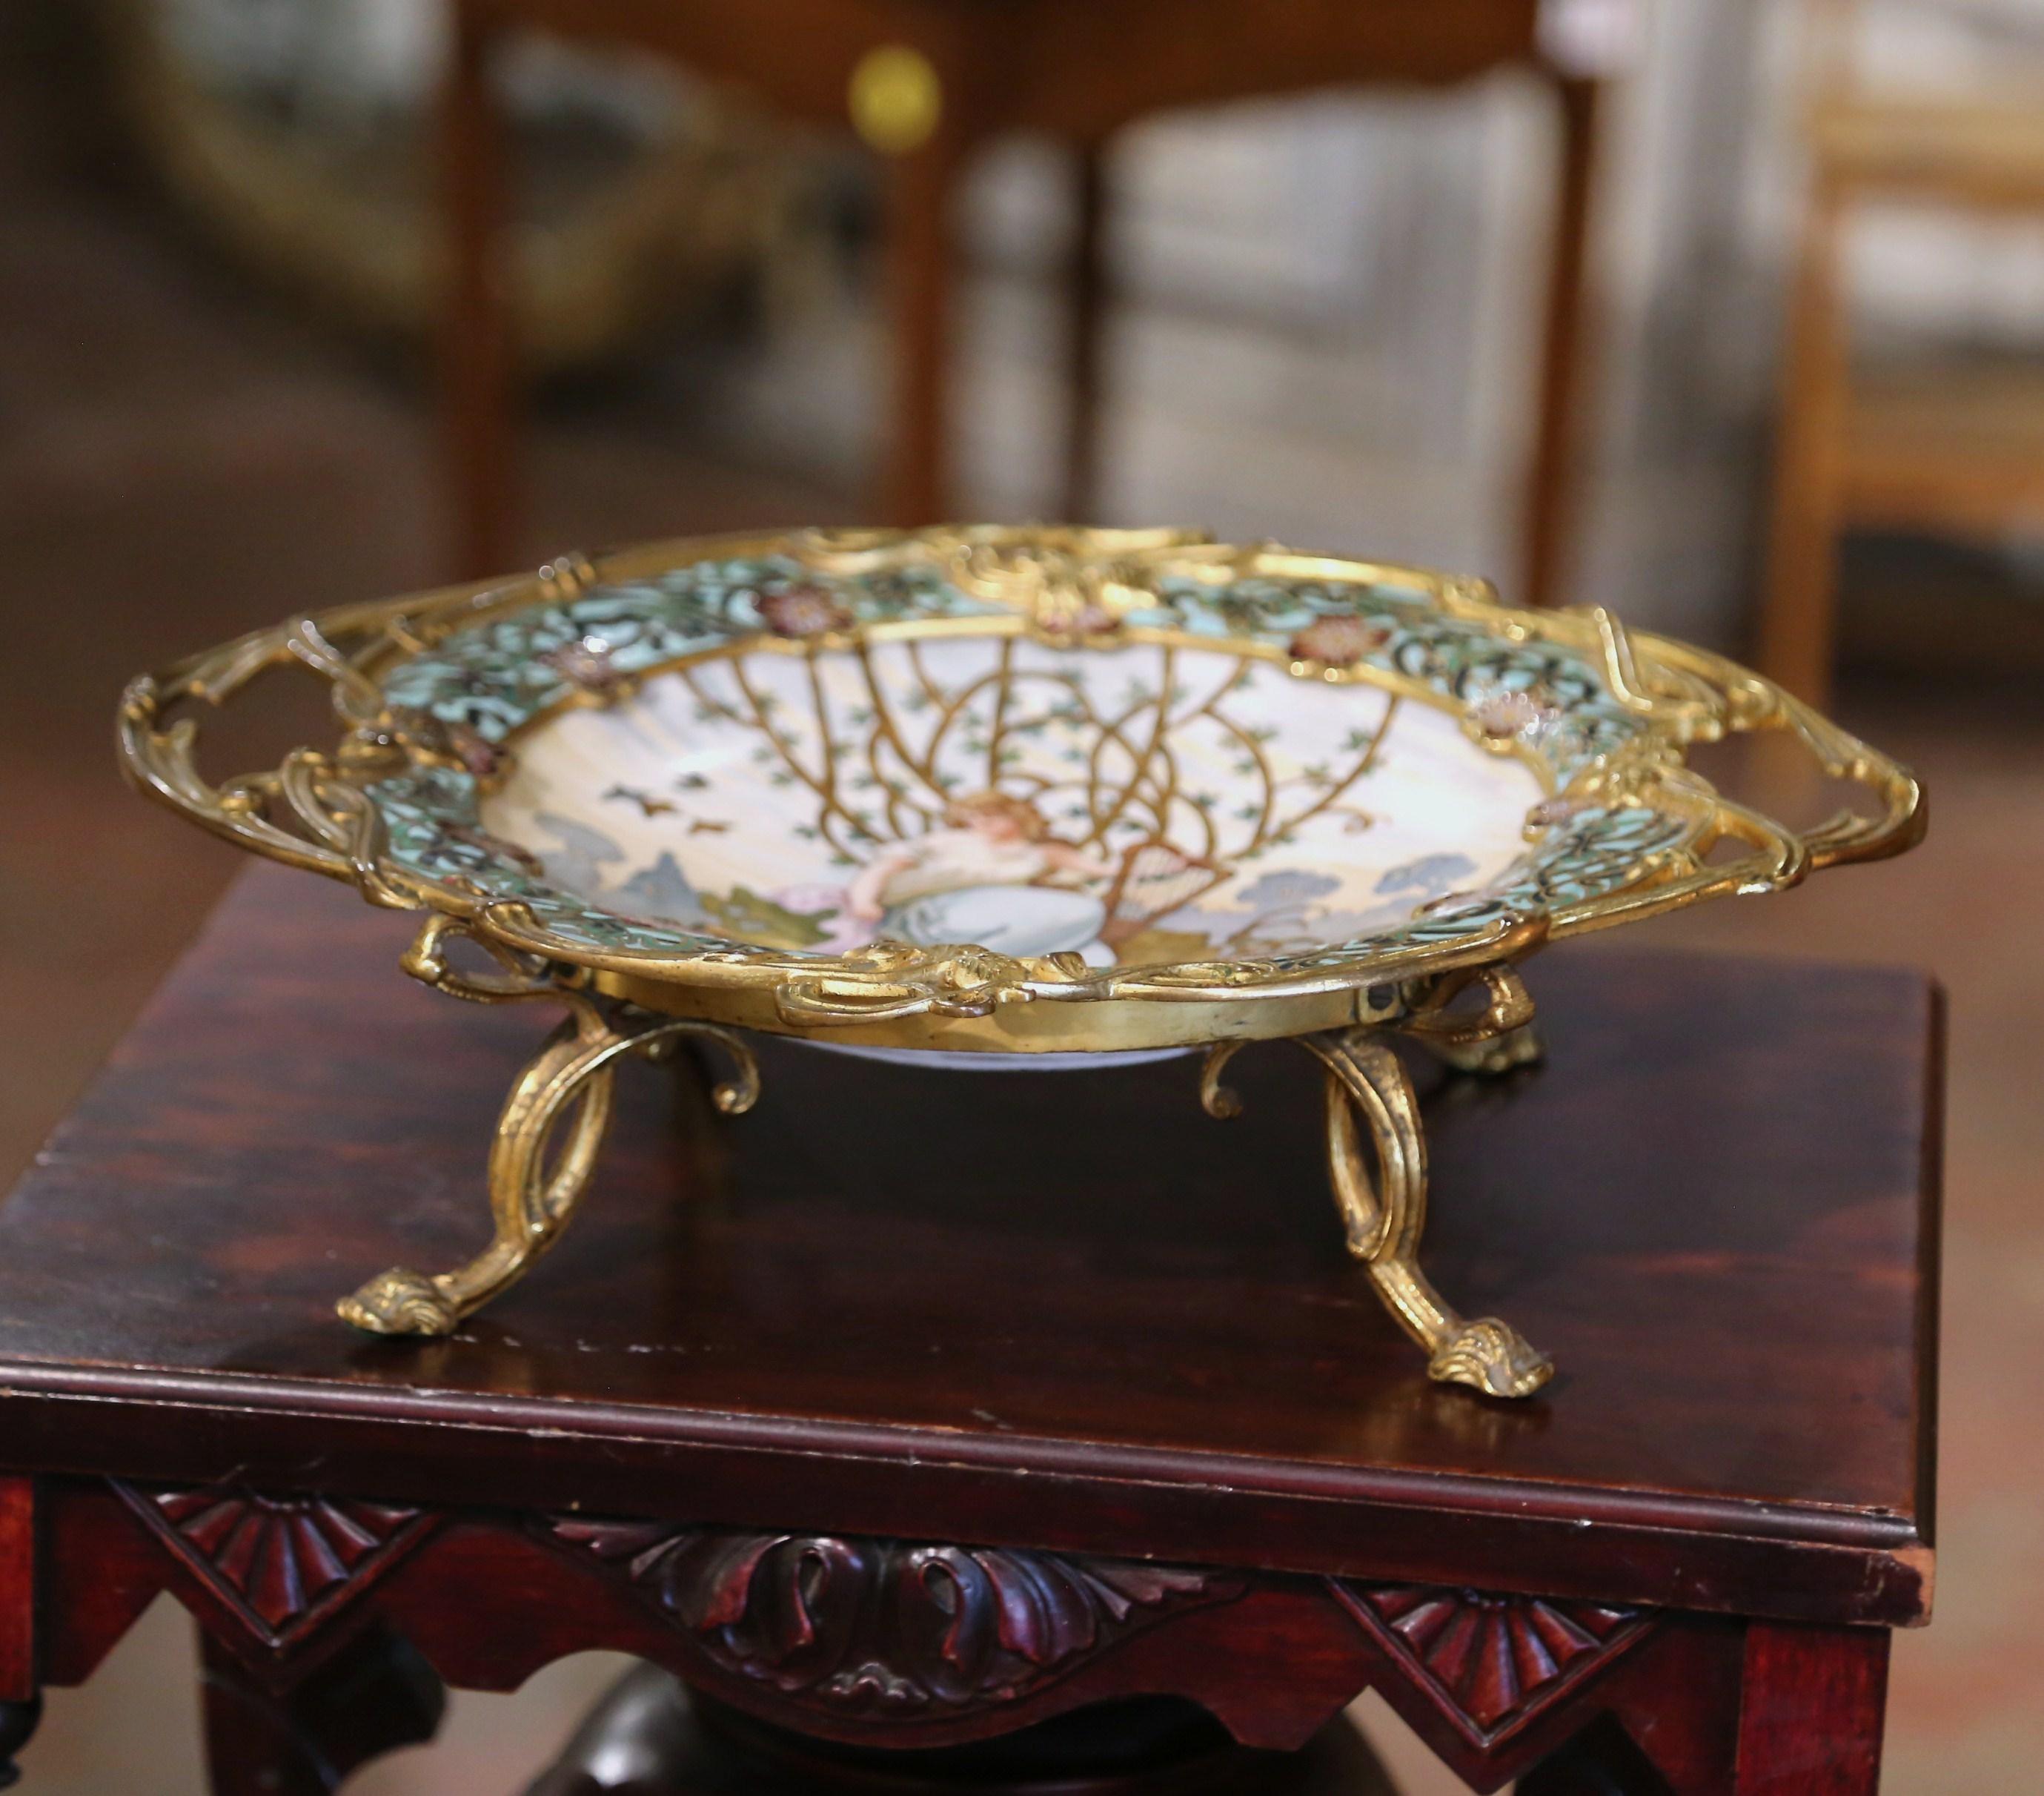 19th Century French Champlevé Enamel and Porcelain Centerpiece Signed Tisserand For Sale 2